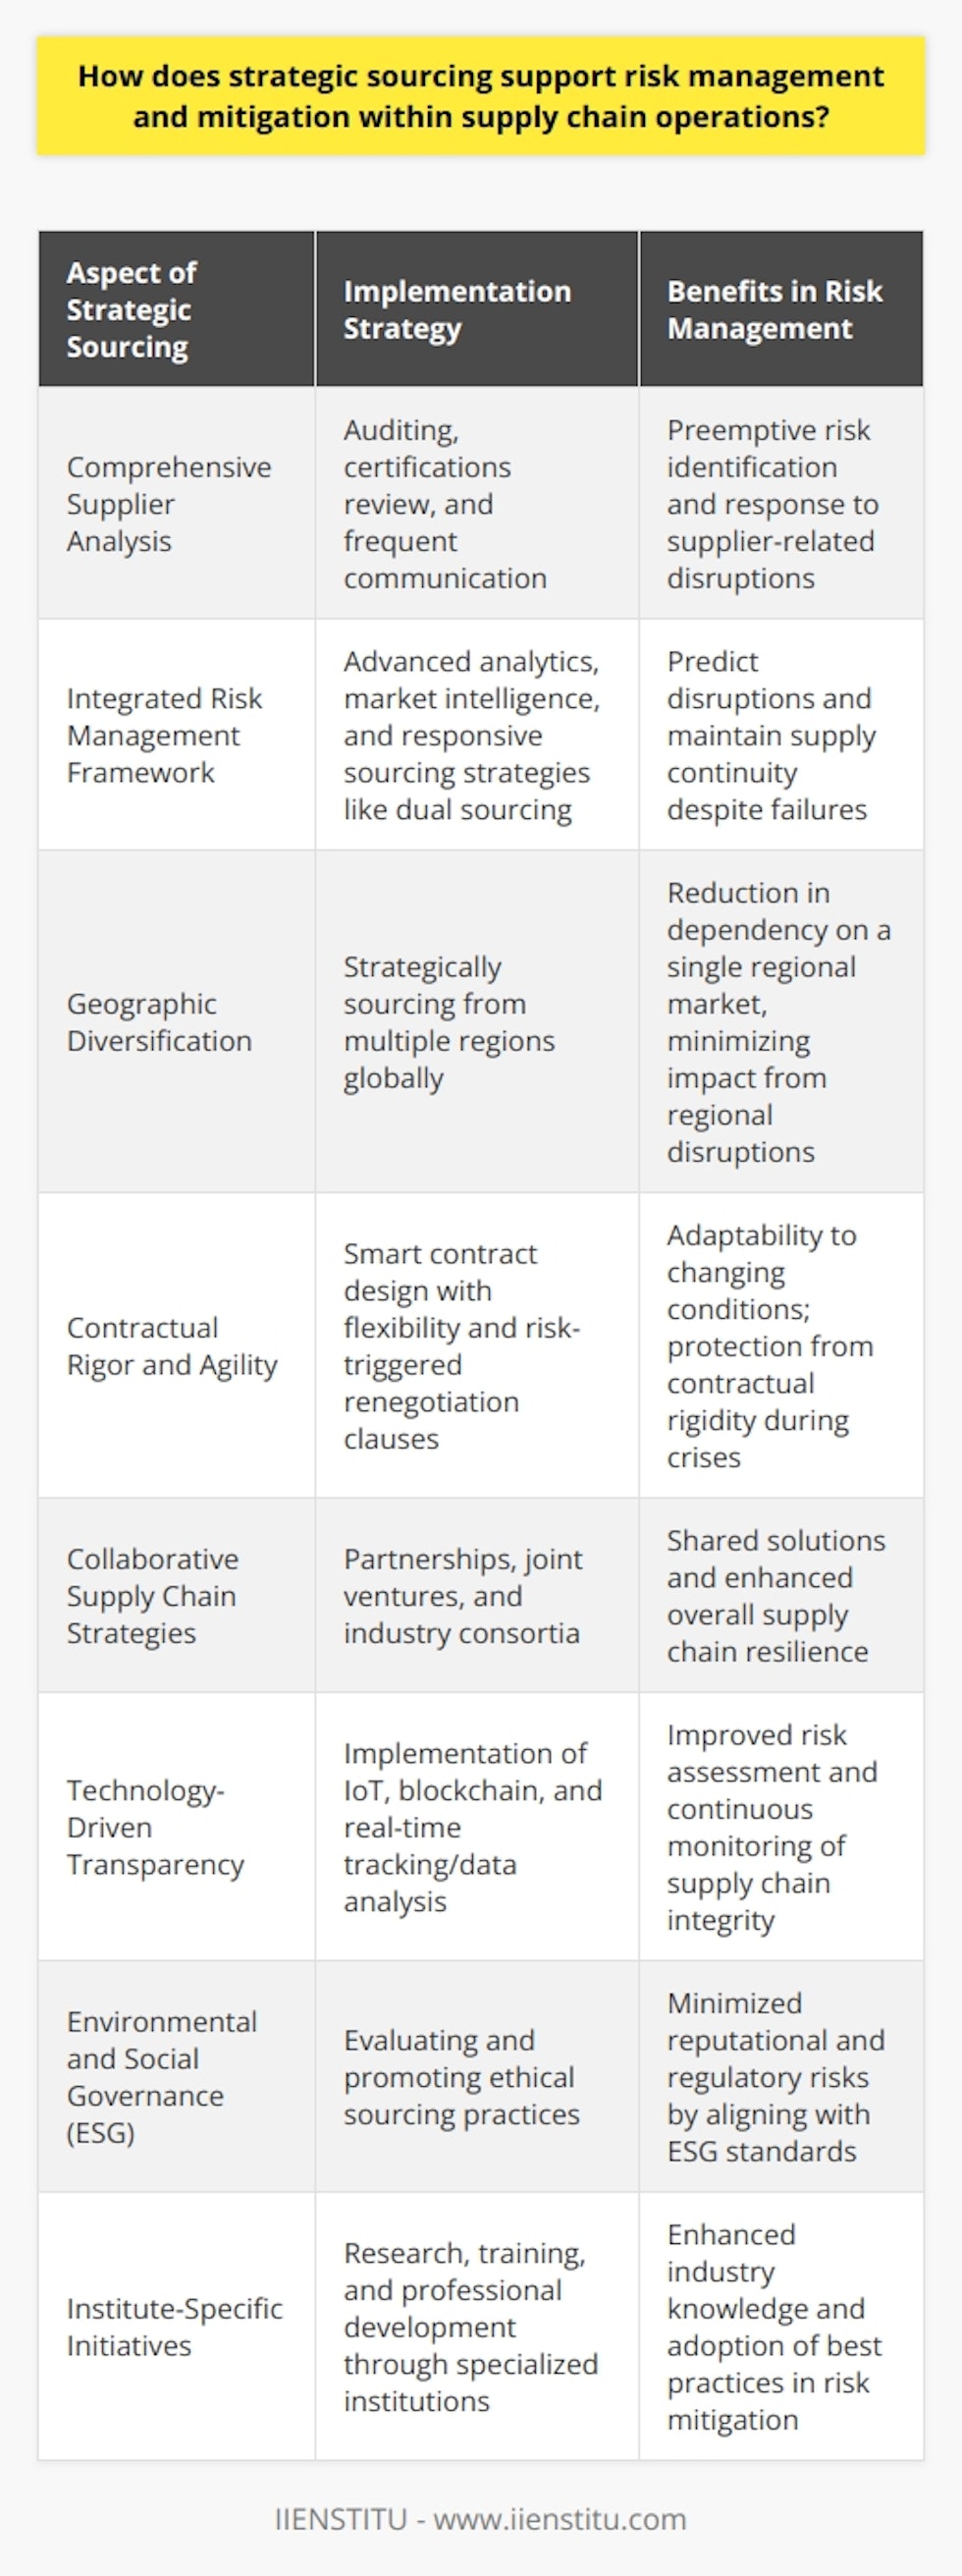 Strategic sourcing is an essential component in fortifying supply chain operations against a multitude of risks. By adopting a holistic and proactive approach, organizations can navigate an unpredictable business landscape and secure their operations. Here's an in-depth look at how strategic sourcing can bolster risk management and mitigation.Comprehensive Supplier AnalysisAt the forefront of strategic sourcing is an extensive analysis of suppliers, not just based on price, but also on reliability, sustainability, and risk exposure. Companies that perform due diligence, such as auditing supplier facilities, reviewing third-party certifications, and engaging in frequent communication, arm themselves with information that can be critical in responding to evolving risk landscapes. By understanding their suppliers’ capabilities and limitations, firms can preemptively address risks before they materialize.Integrated Risk ManagementWithin strategic sourcing is an integrated risk management framework. This includes identifying risks, measuring their potential impact, monitoring them continuously, and developing strategic responses. Companies leverage advanced analytics and market intelligence to predict disruptions and implement responsive strategies like dual sourcing, where critical components are sourced from different suppliers to mitigate the risk of supply failure.Geographic DiversificationSupply chains can be vulnerable to geographic risks such as natural disasters, political instability, or localized economic downturns. By strategically sourcing from different regions, companies can insulate themselves against regional disruptions. Geographic diversification of suppliers ensures that a company is not wholly dependent on one regional economy, reducing the likelihood of a supply chain bottleneck.Contractual Rigor and AgilityIn the realm of strategic sourcing, contracts play a pivotal role. Smart contracts with clearly defined terms for quality, delivery, and penalties for non-compliance, along with clauses that allow for flexibility in the face of changing circumstances, are indispensable. They allow for the renegotiation of terms if predefined risk thresholds are triggered, ensuring that companies are not locked into disadvantageous terms during crisis periods.Collaborative Supply Chain StrategiesBeyond the confines of their organization, companies often engage in collaborative efforts with suppliers and, in some cases, with competitors. By joining forces to pool resources or information, companies can often better anticipate and react to risks. Joint ventures or industry consortia can lead to shared supply chain solutions that benefit all participants.Technology-Driven TransparencyAdvancements in technology, particularly in data analysis, IoT, and blockchain, offer unprecedented levels of supply chain transparency. Strategic sourcing capitalizes on this by integrating technologies that allow for real-time tracking of goods and materials, monitoring supplier performance, and verifying the authenticity and ethical provenance of products. This live data stream serves as a critical tool in risk assessment and mitigation strategies.Environmental and Social Governance (ESG)In addition to traditional risk factors, strategic sourcing now also increasingly integrates ESG considerations. This includes evaluating suppliers' environmental policies, labor practices, and governance structures. By promoting ethical sourcing, companies can avoid the reputational damage and regulatory risks associated with suppliers that do not adhere to acceptable ESG standards.Institute-Specific InitiativesEducational institutes like IIENSTITU delve into research and training, fostering a deeper understanding of these strategic sourcing practices. They contribute to enhancing industry standards by equipping professionals with cutting-edge knowledge and empowering them to implement effective risk mitigation strategies in their organizations.Through strategic sourcing, companies are equipped to systematically manage risk, ensuring resilience, continuity, and compliance. The ability to anticipate risks, react with agility, and maintain operational integrity is crucial in today's complex supply chain ecosystem. Adopting advanced methods of strategic sourcing is now a necessity for robust risk management and effective supply chain operations.